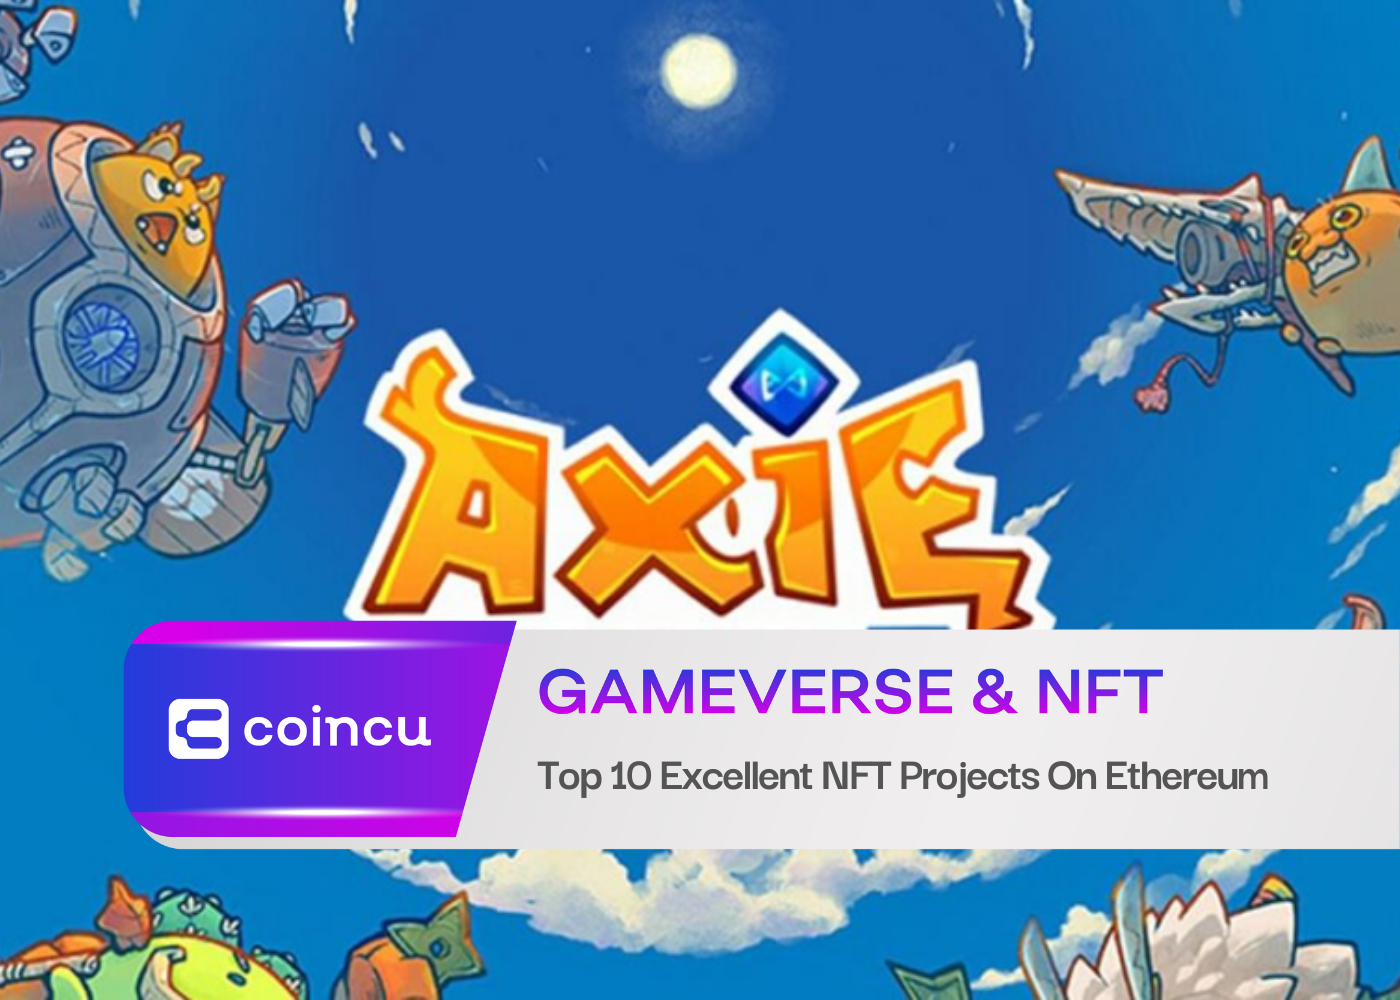 Top 10 Excellent NFT Projects On Ethereum